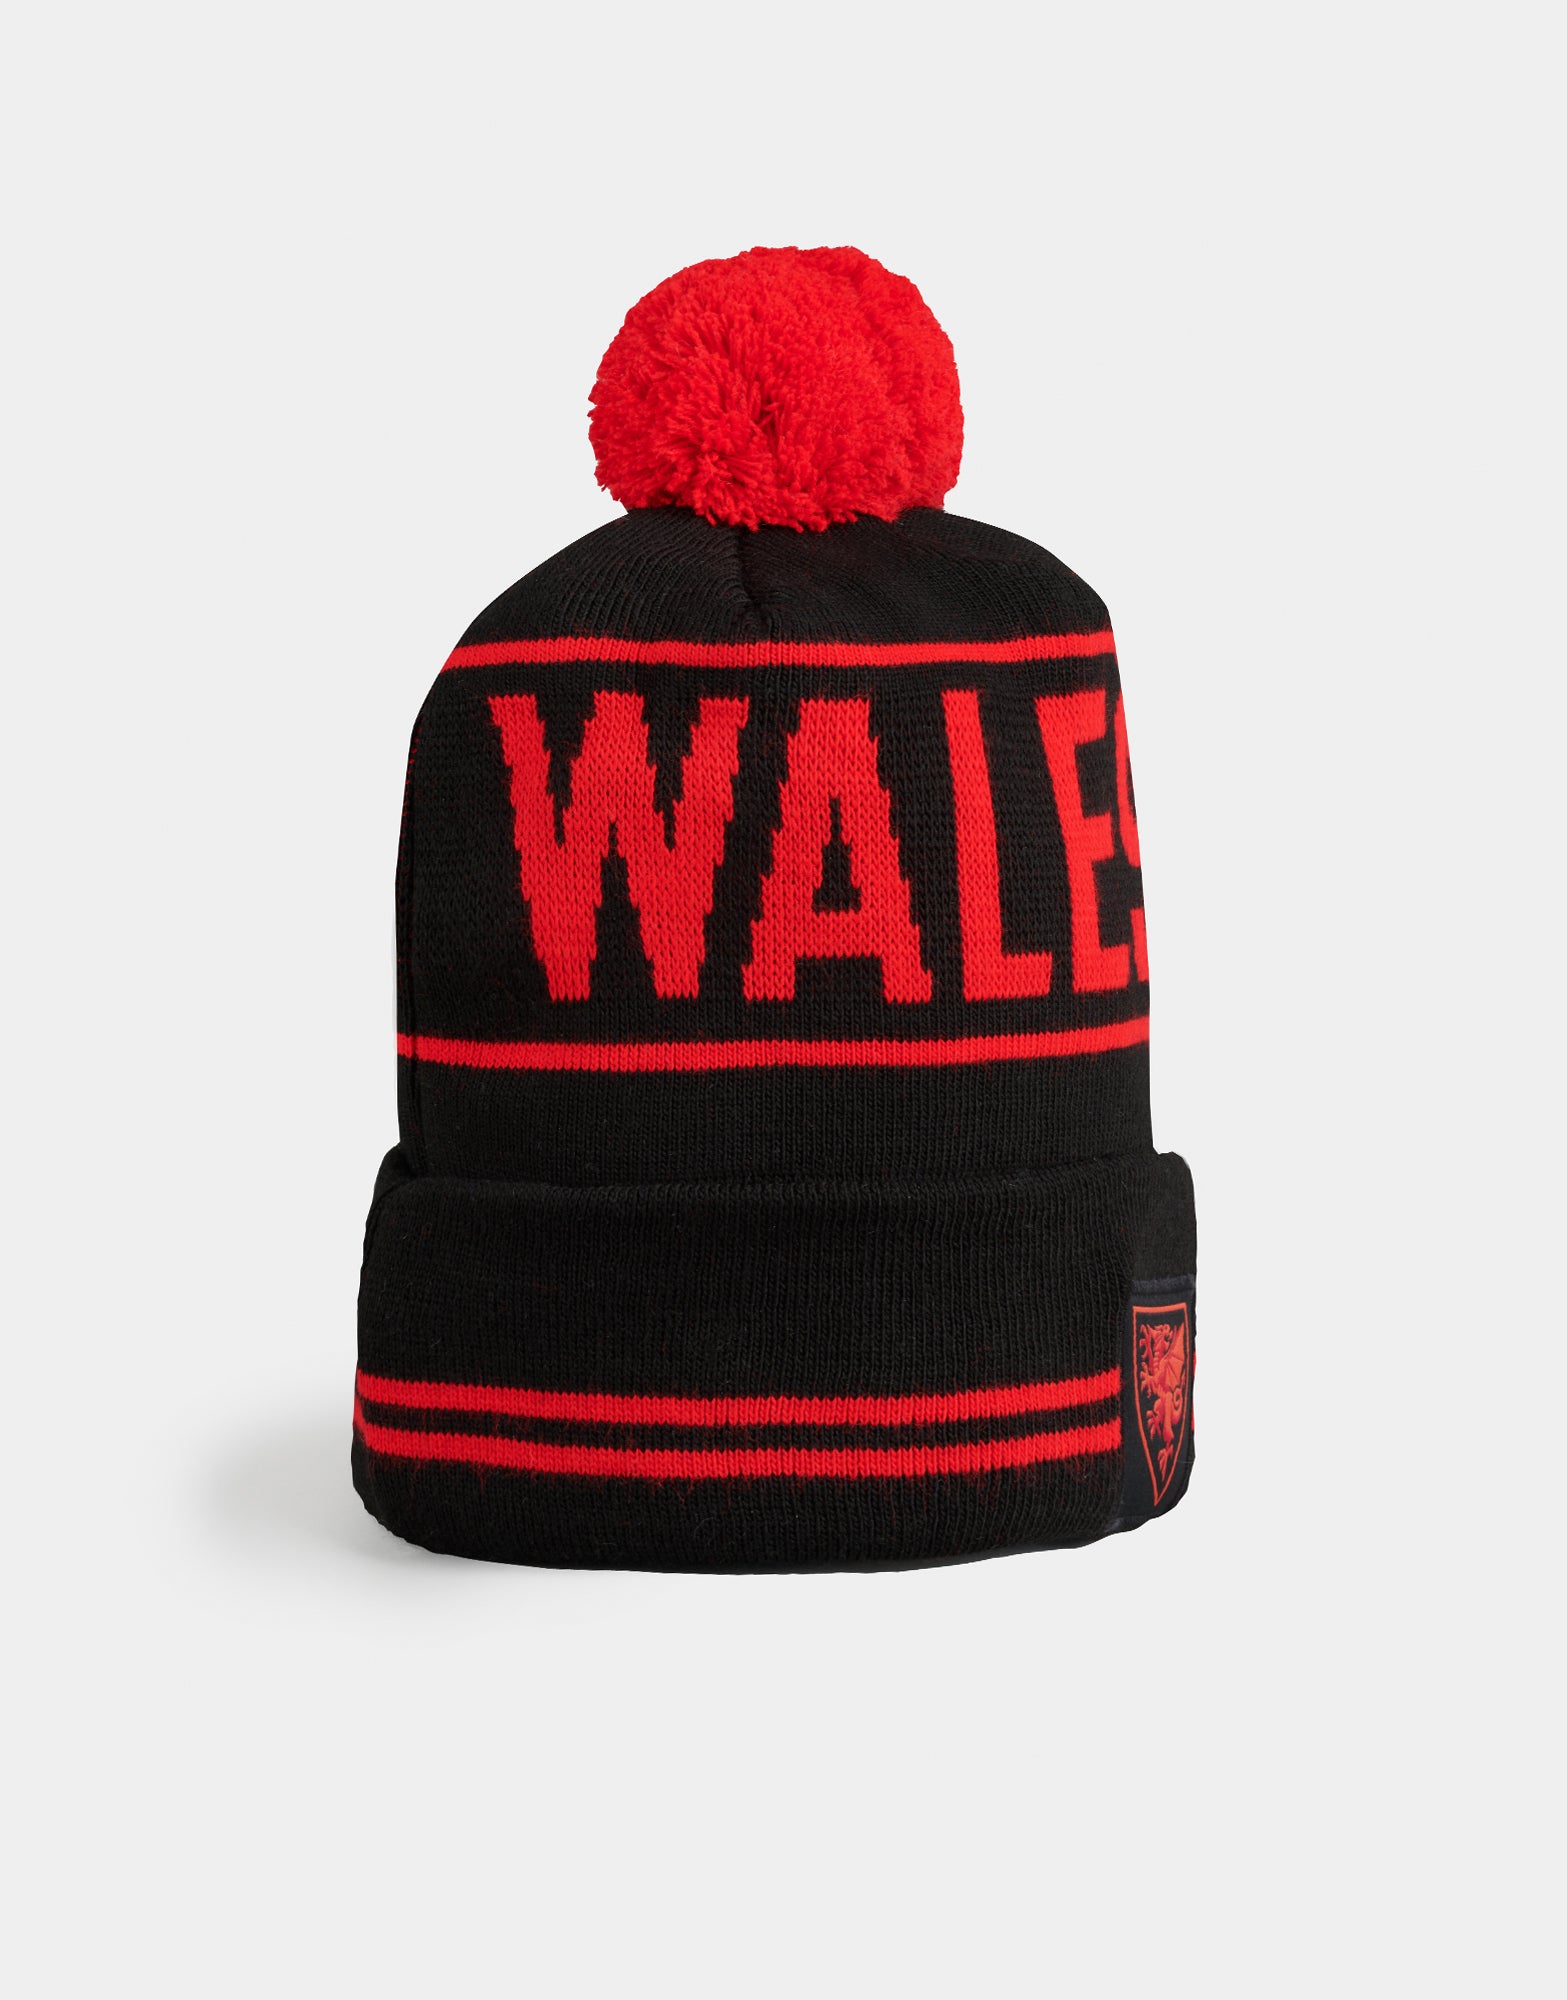 Official Team Wales Bobble Hat